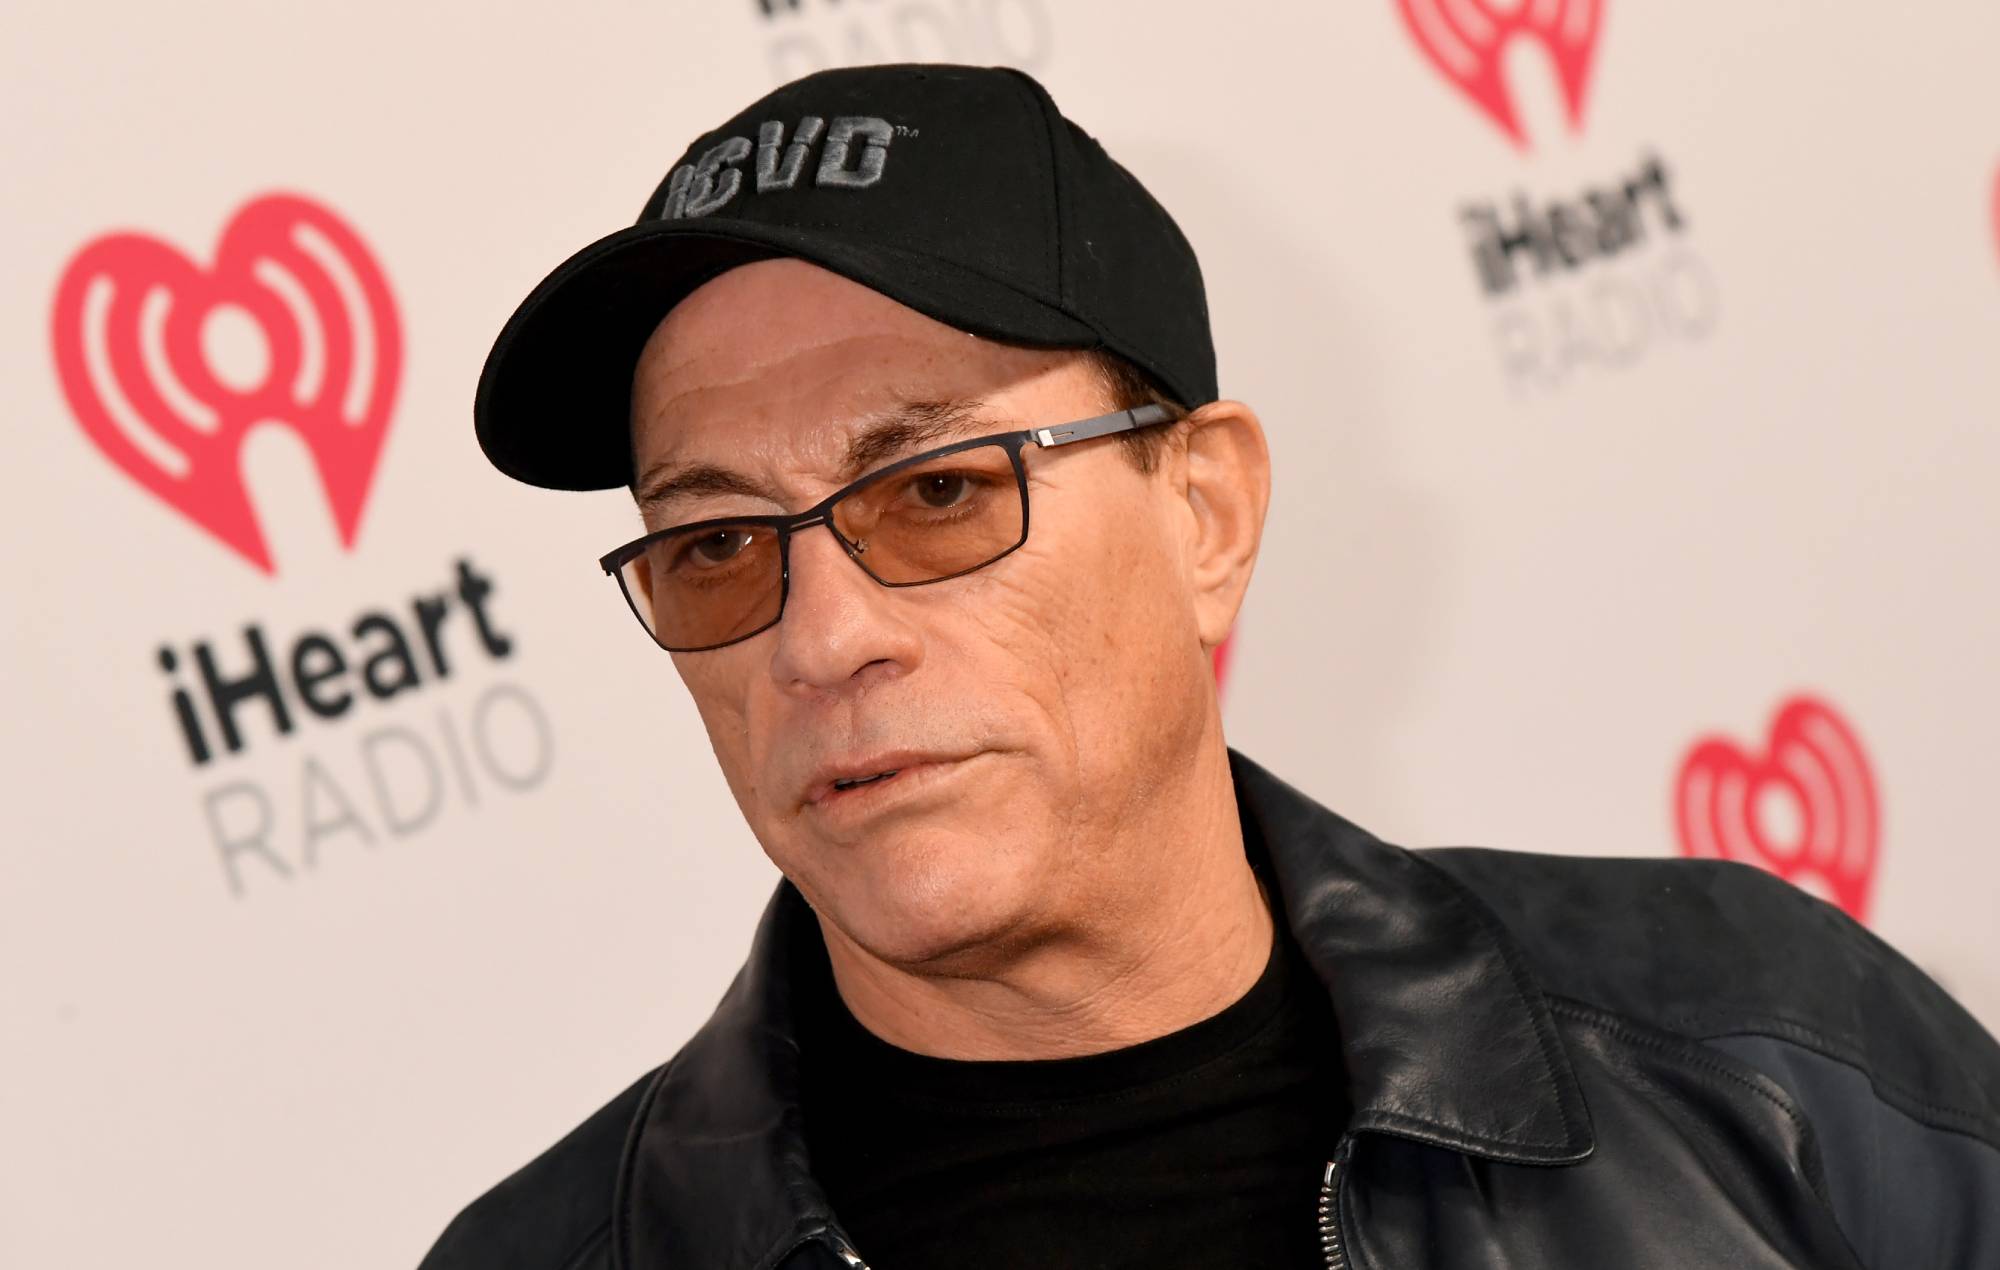 Jean-Claude Van Damme is embarrassed by his ‘Friends’ appearance